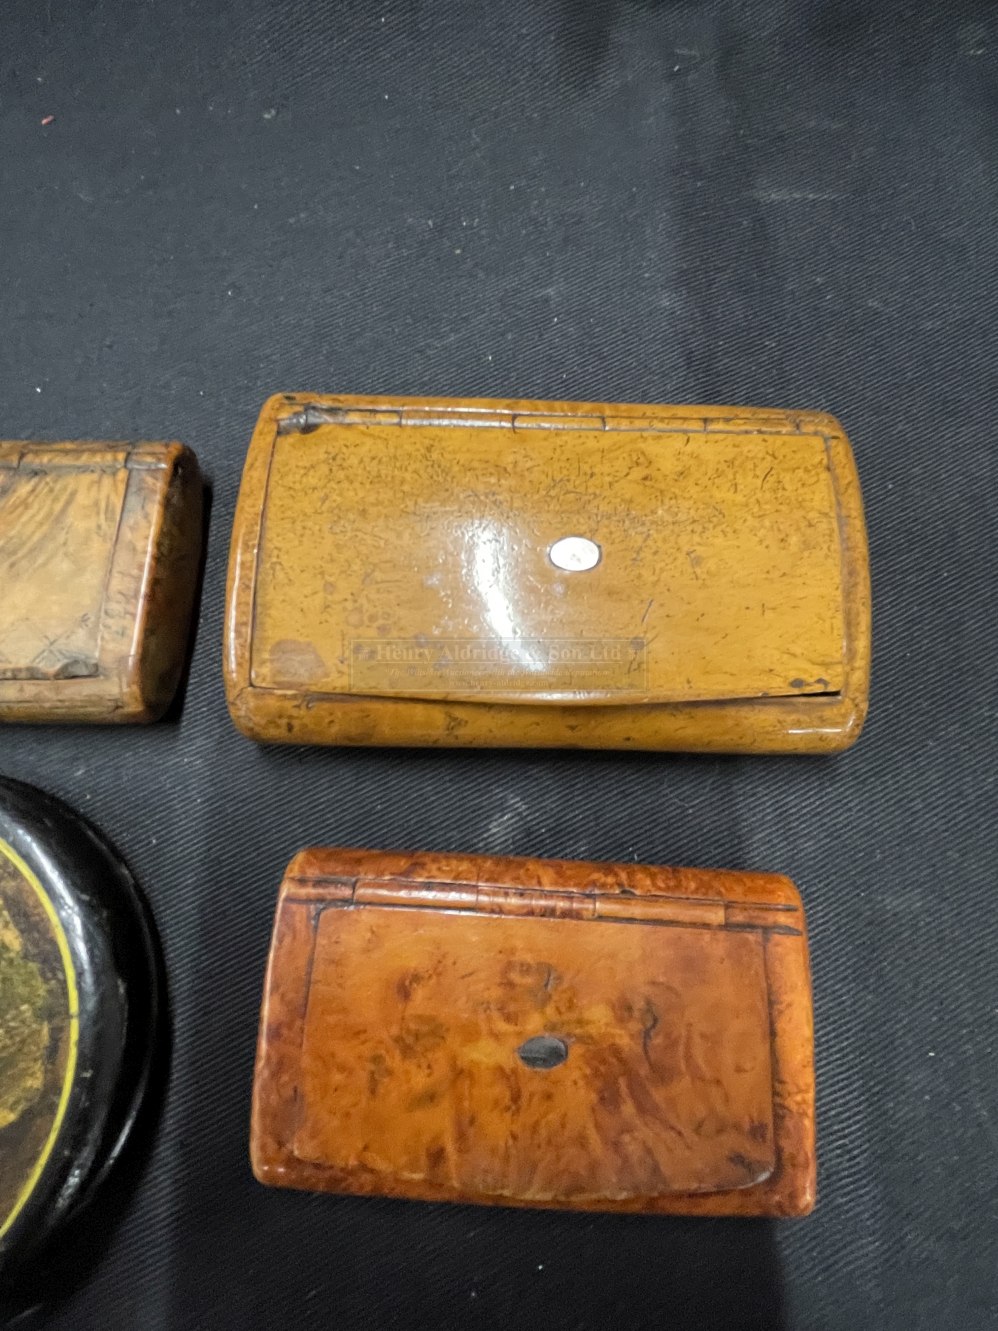 19th cent. Snuff boxes, three treen and two papier mache boxes. (5) Plus matchbox cover. - Image 2 of 4